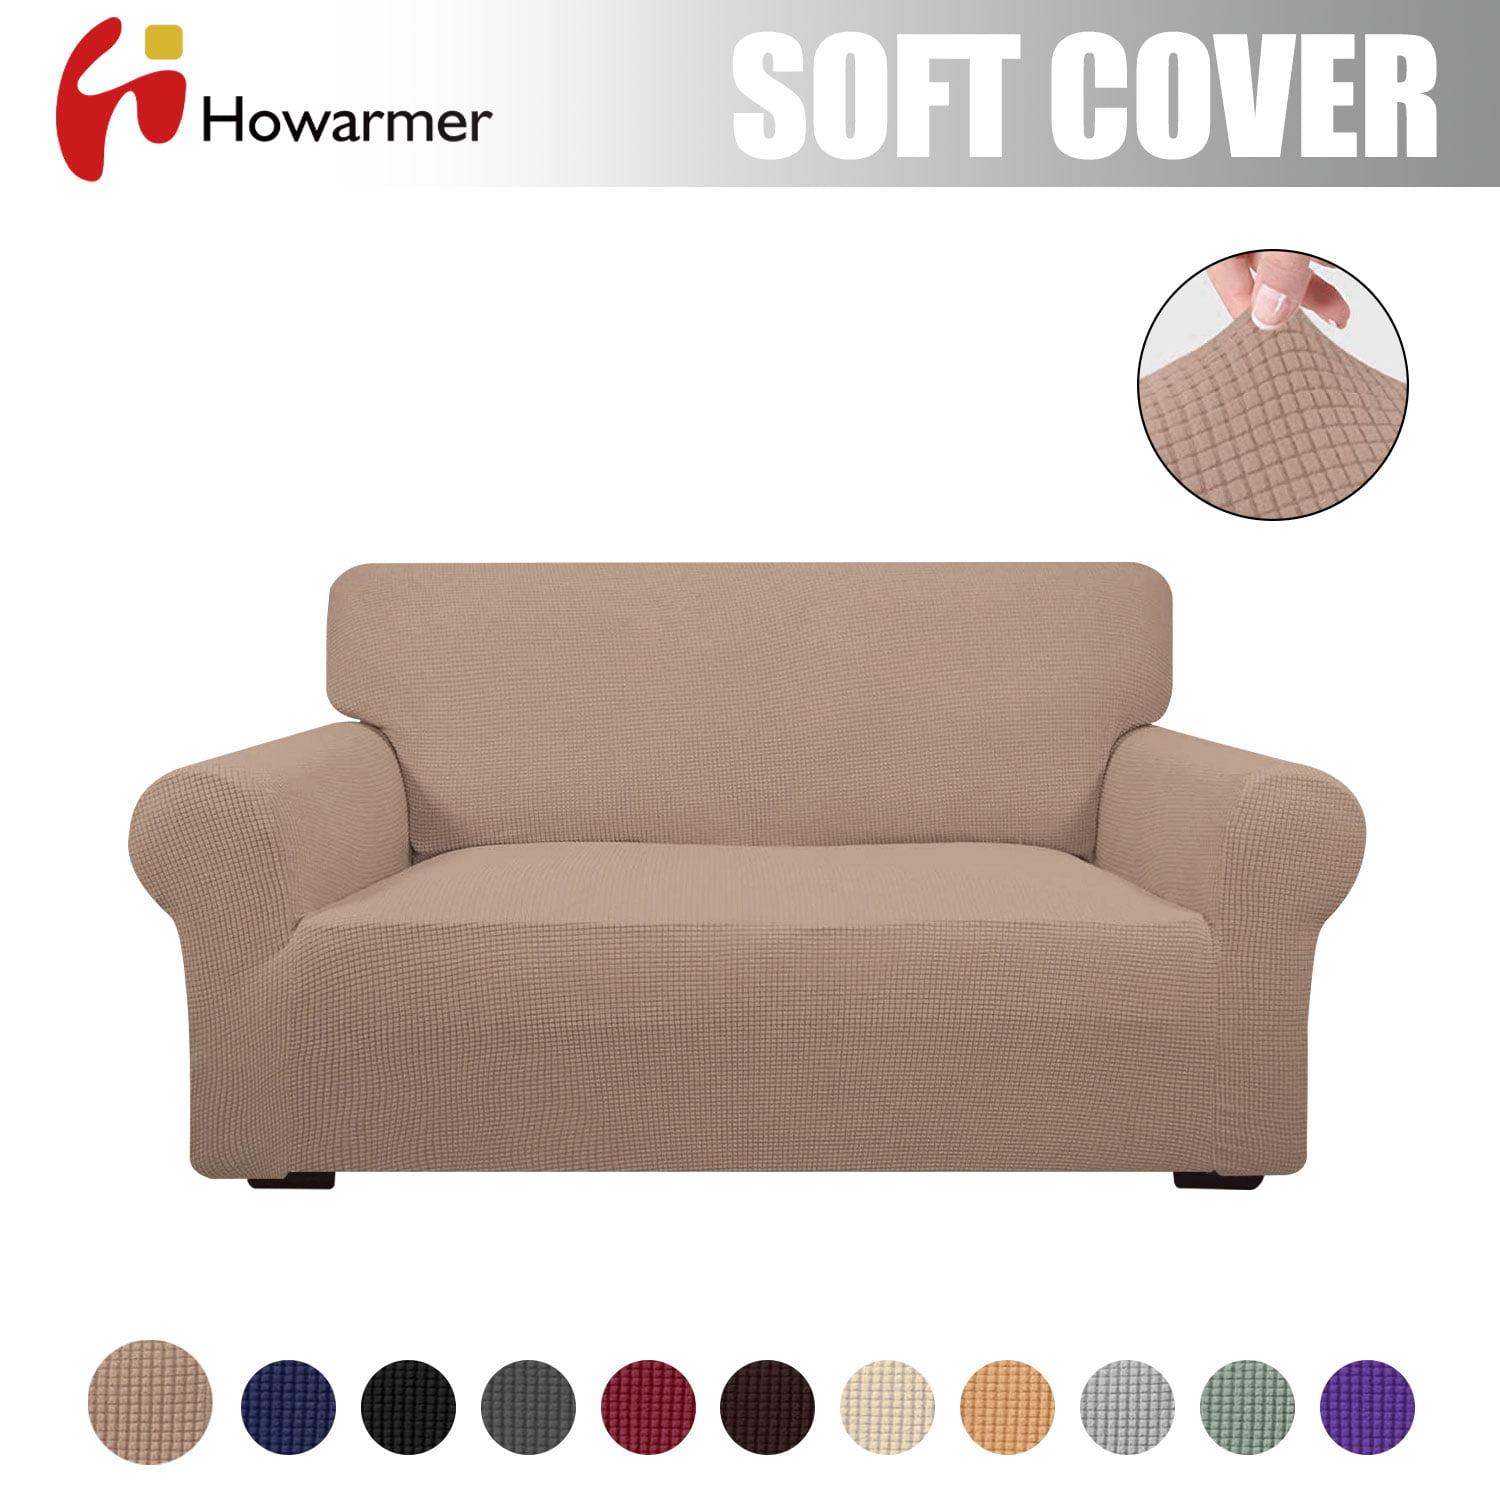 3 Seater Green, Sofa Stretch Cover 1-Piece Elastic Knit Fabric Slipcover Couch Cover Armchair Non Slip Sofa Slipcover Protector for Home Dining Room